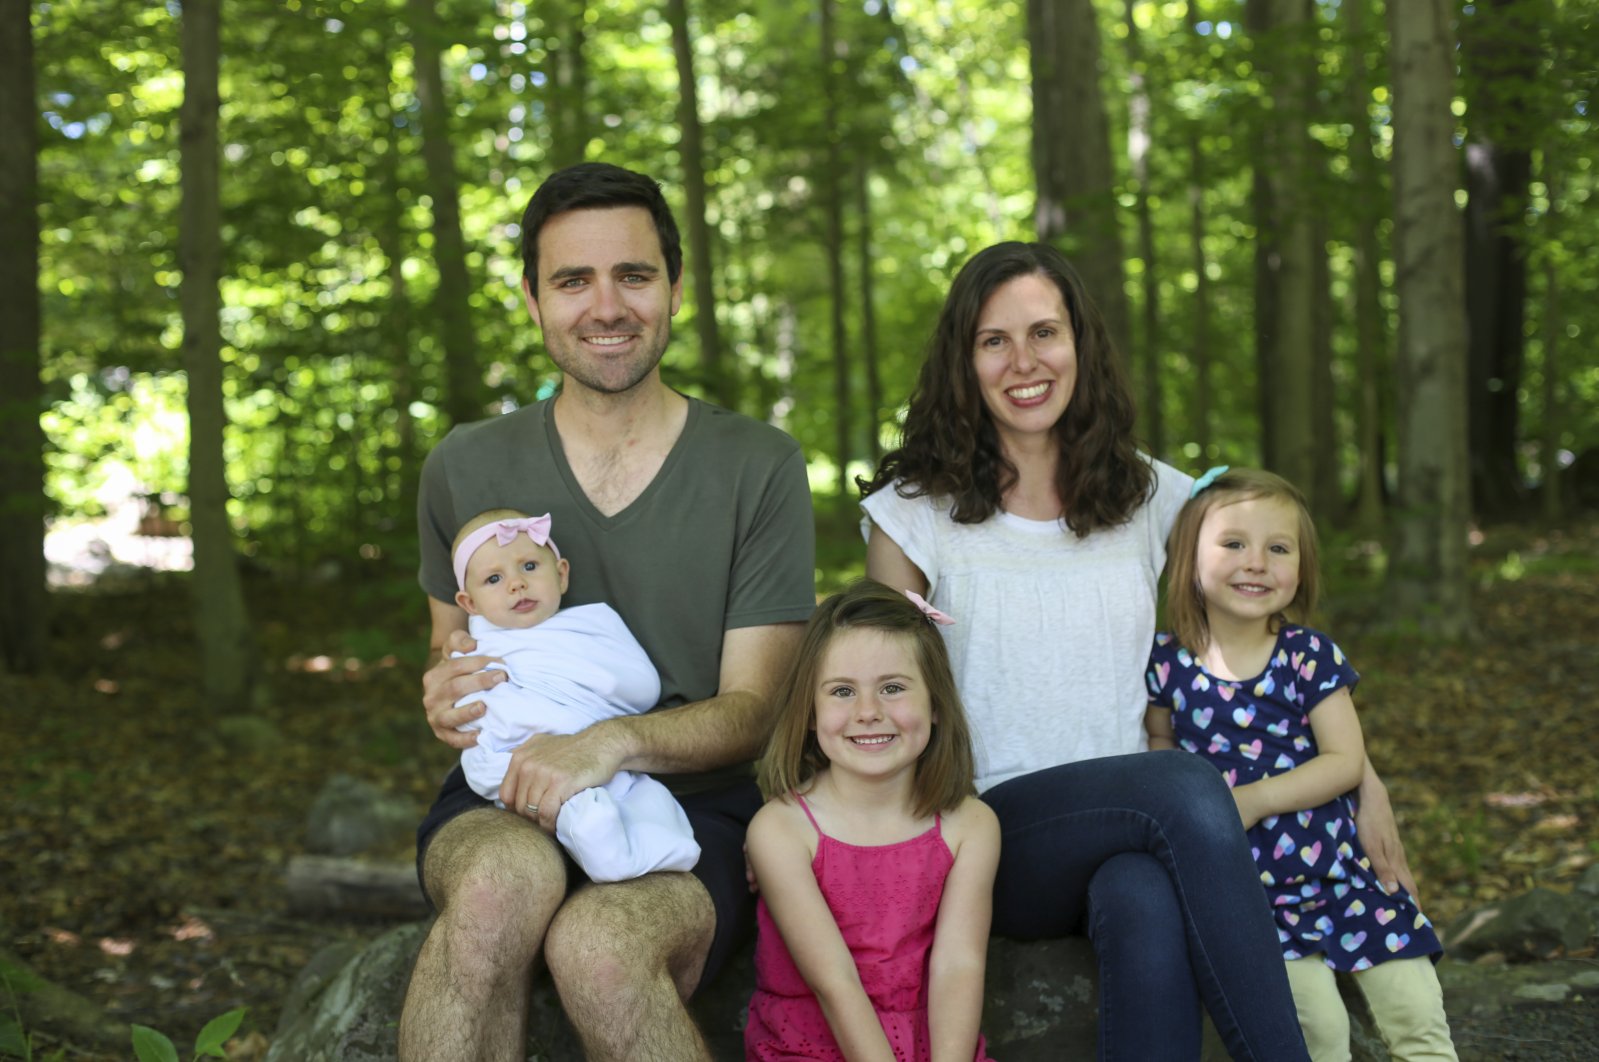 This June 17, 2020 photo shows Tyler Moore, his wife, Emily Moore, and daughters Mabel, 5, center, Matilda, 3, and Margaret, 3 months. (Pamela Henderson via AP).